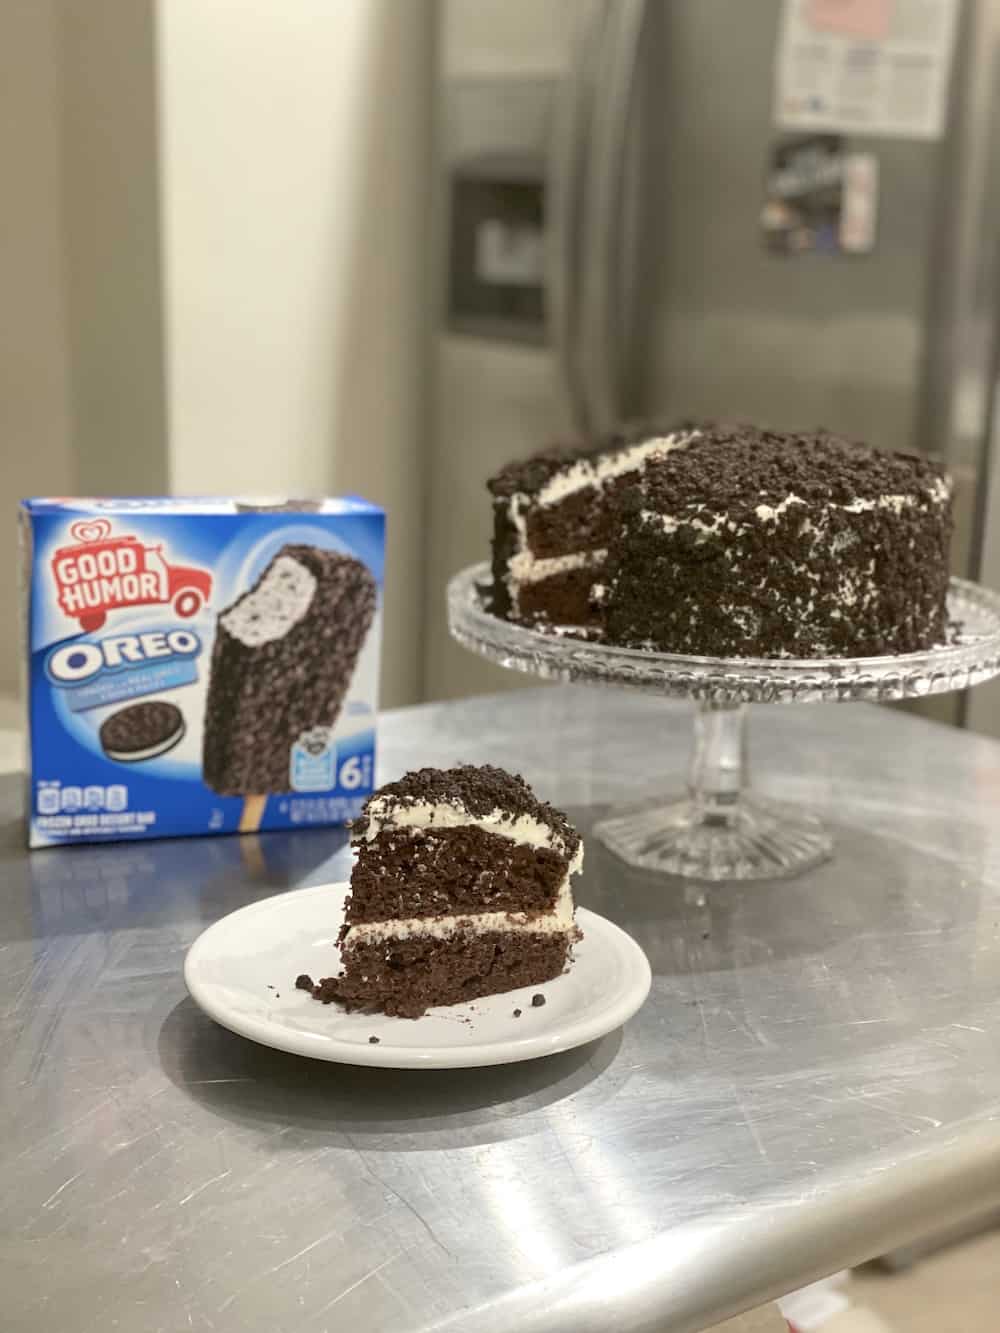 You will love this Chocolate Oreo Cake Recipe! It's a moist chocolate cake covered in vanilla buttercream and chocolate crumbles!